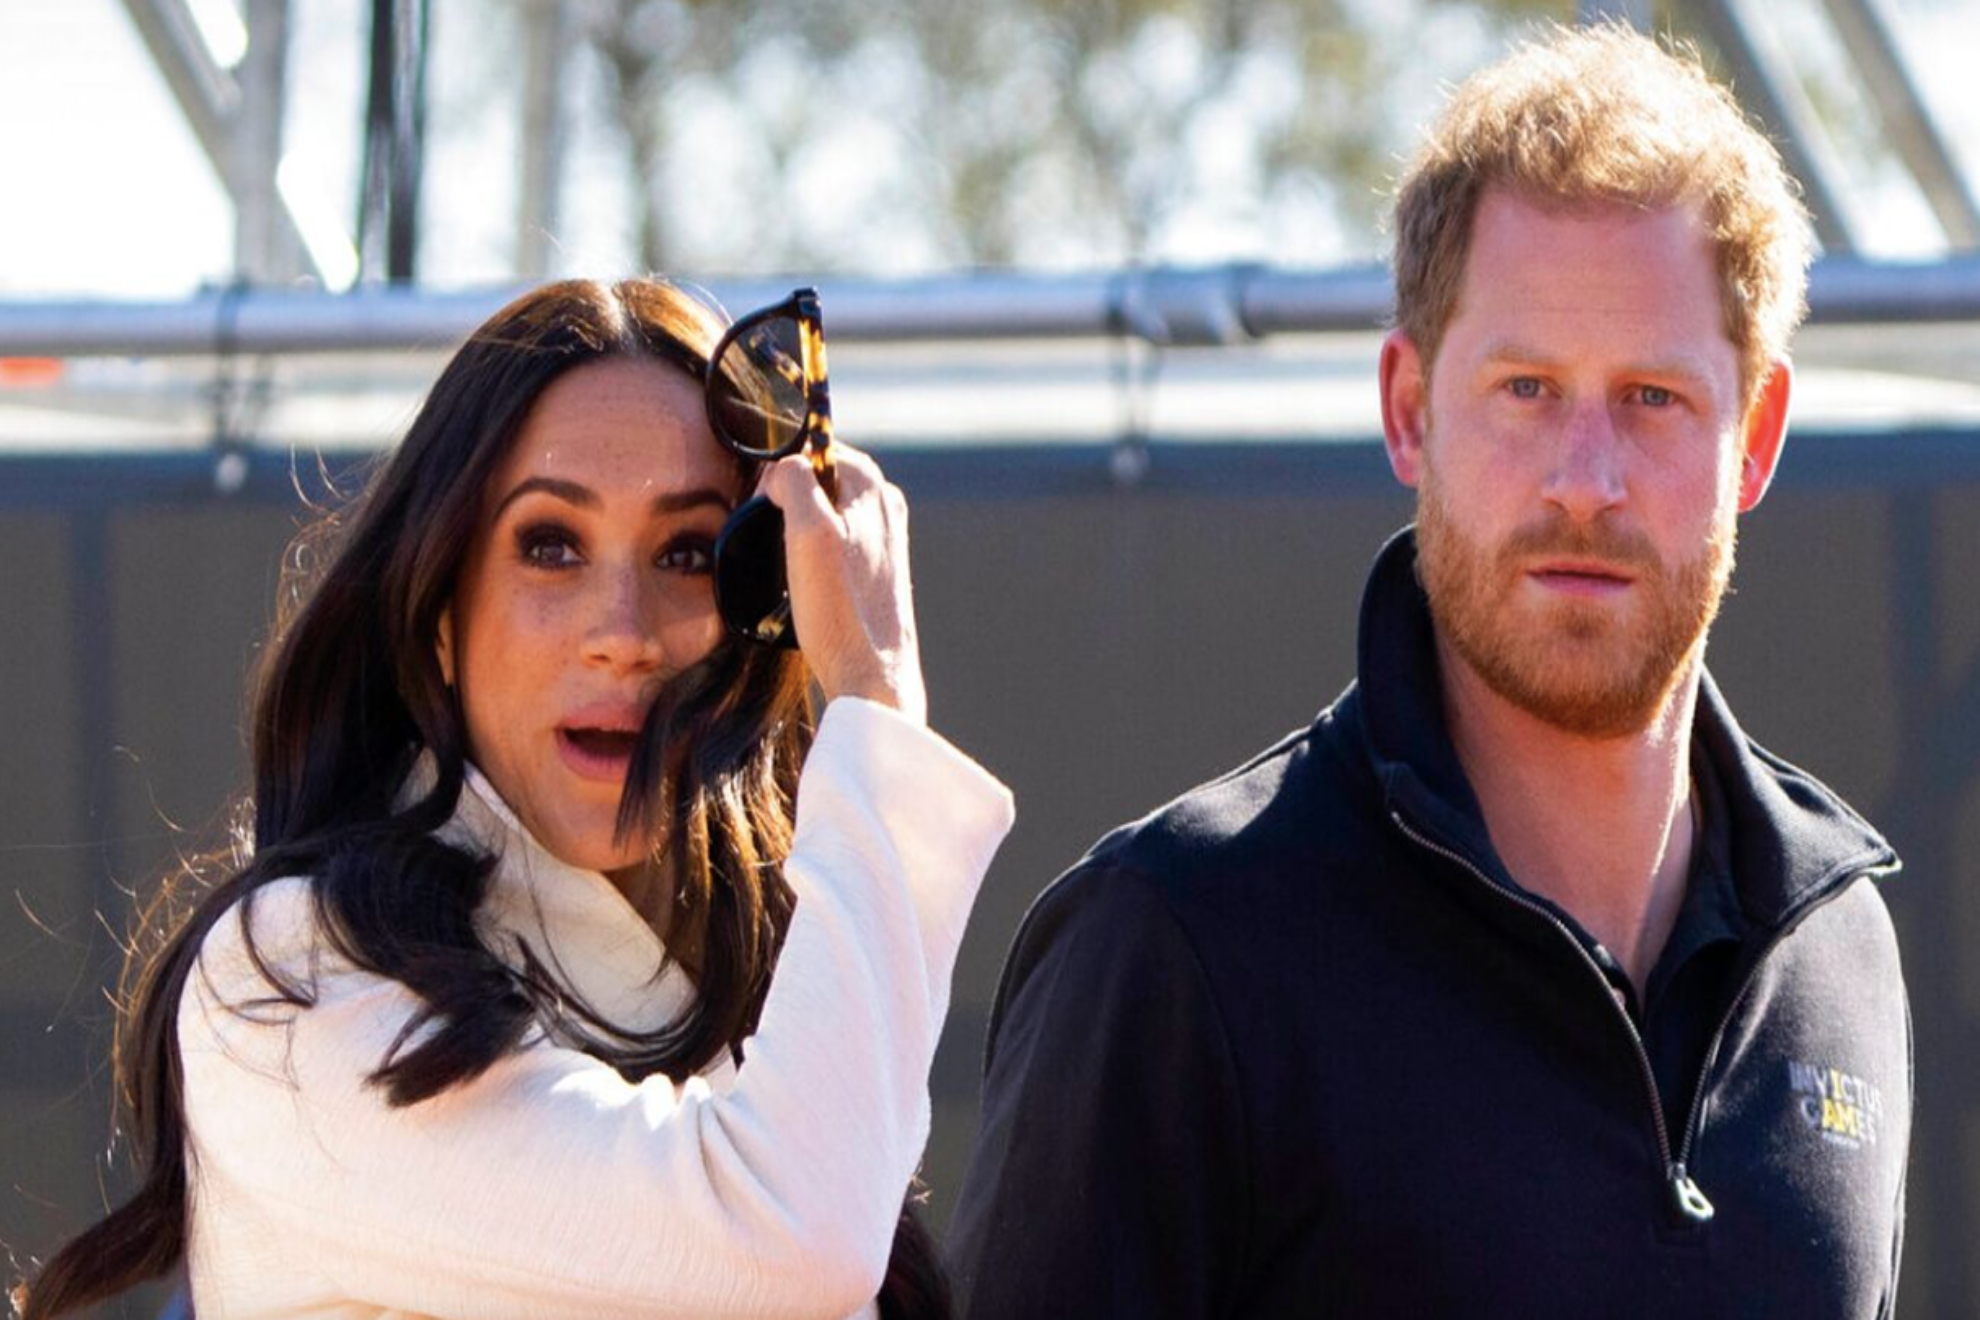 Fear of King Charles' response has forced Prince Harry and Meghan Markle to make life-changing decision